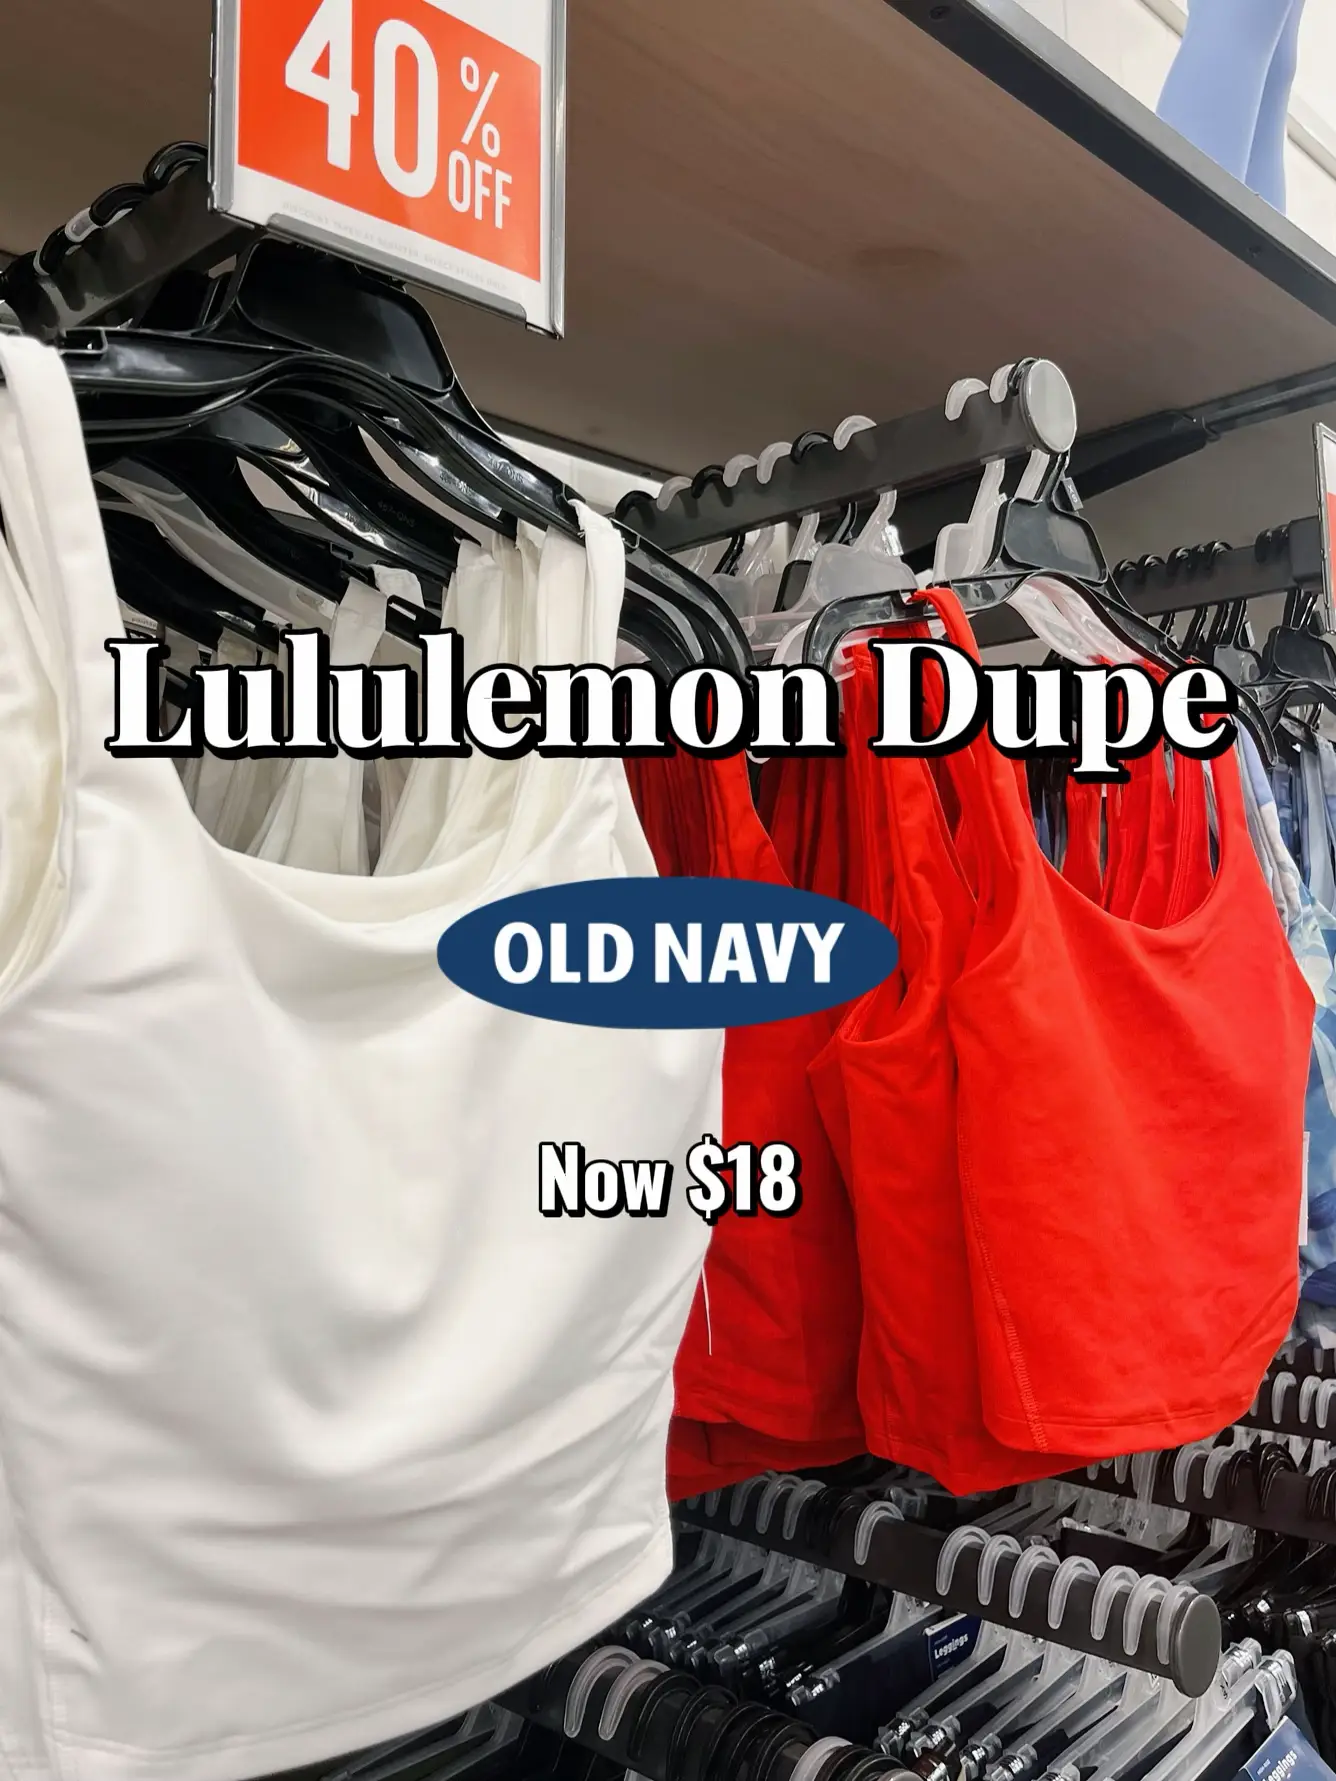 TESTING LULULEMON DUPES FROM OLD NAVY, Old Navy Active Wear Review